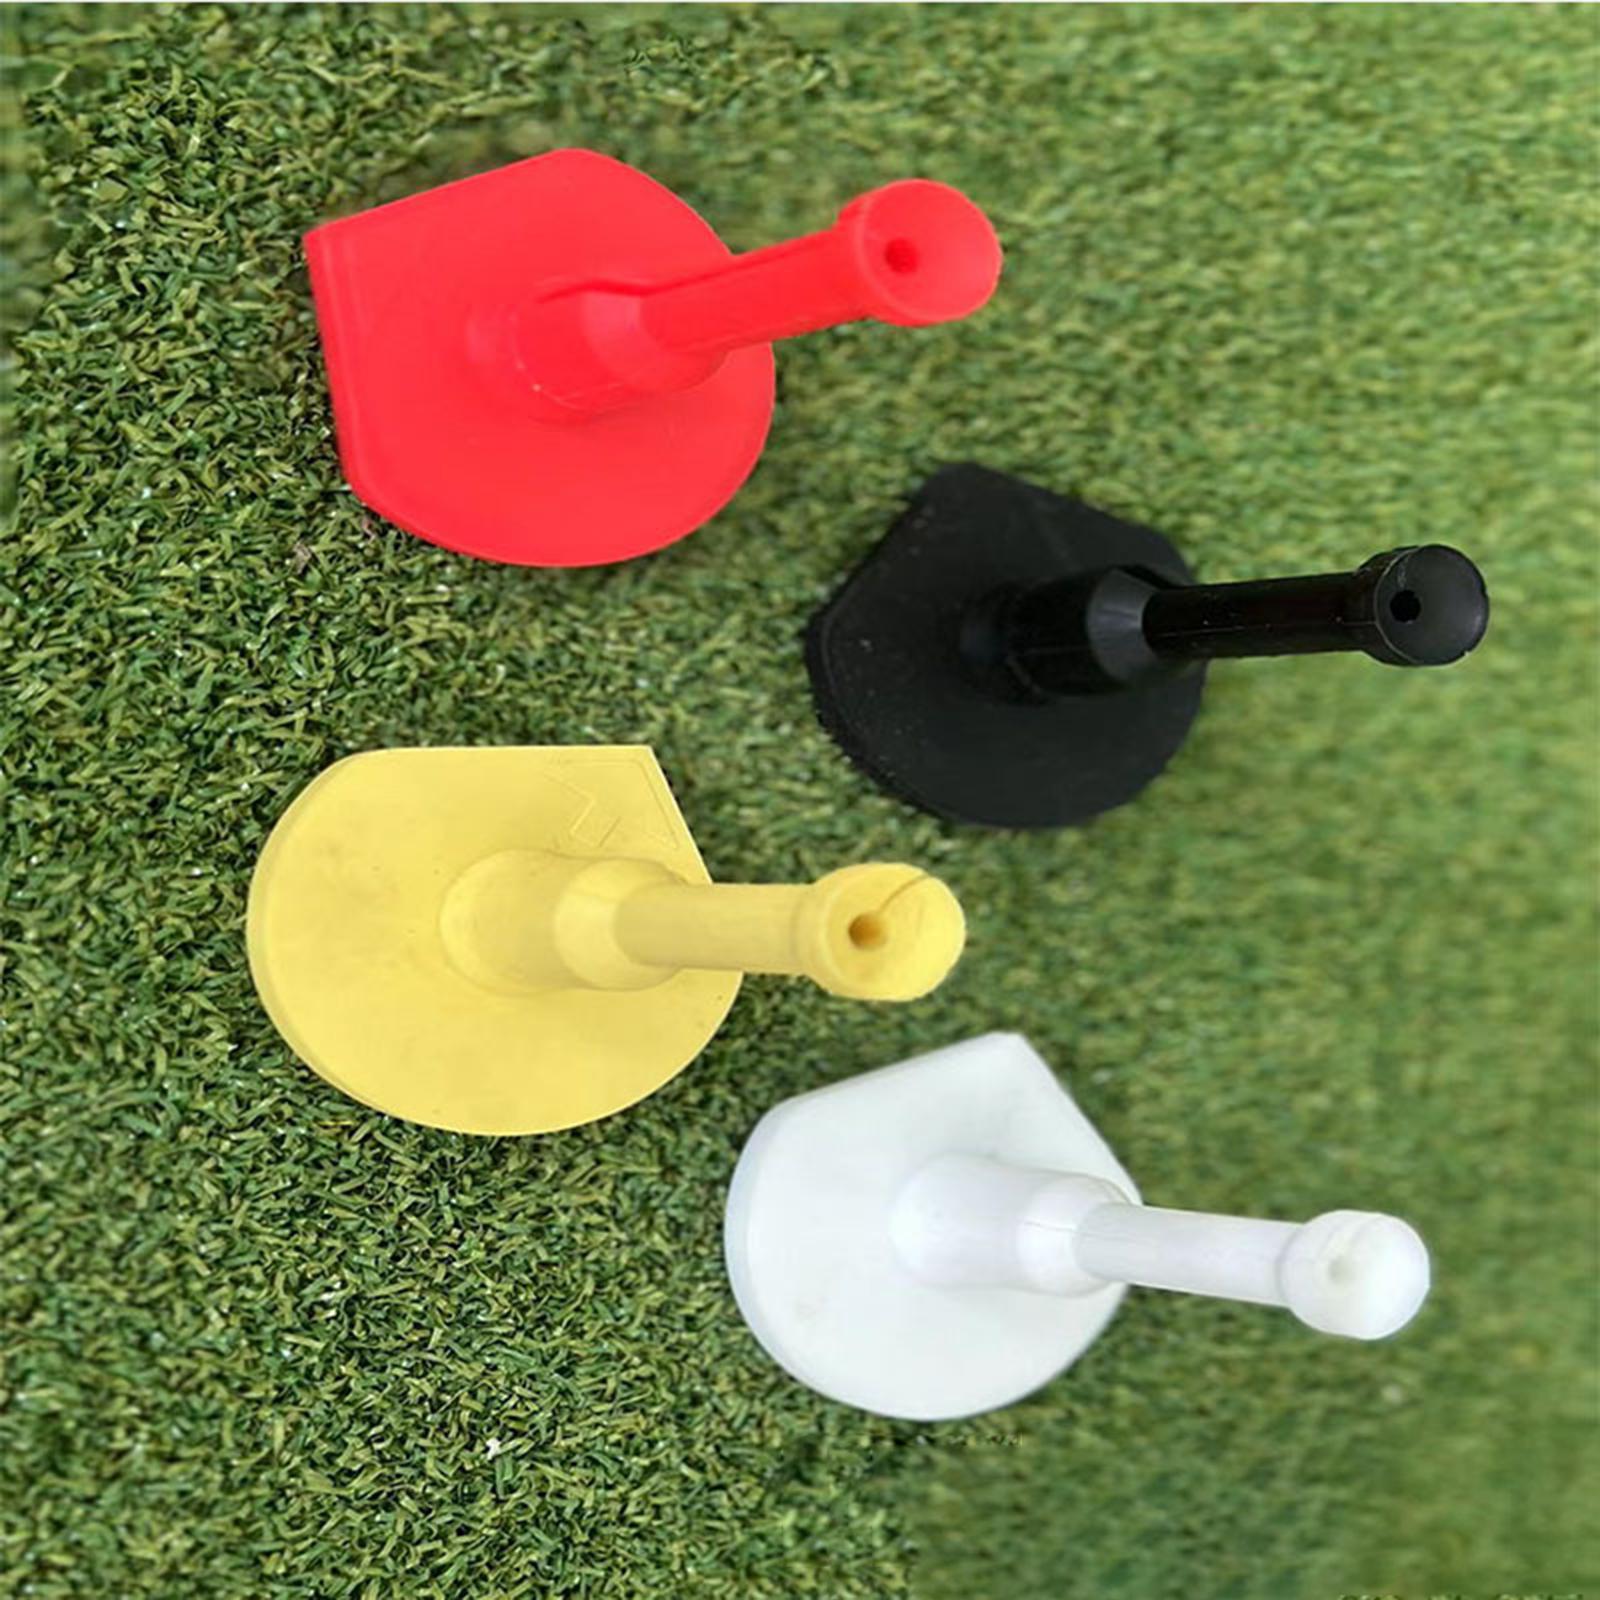 PVC Rubber Golf Tees Holder Portable Reusable Durable for Sports Accessories white